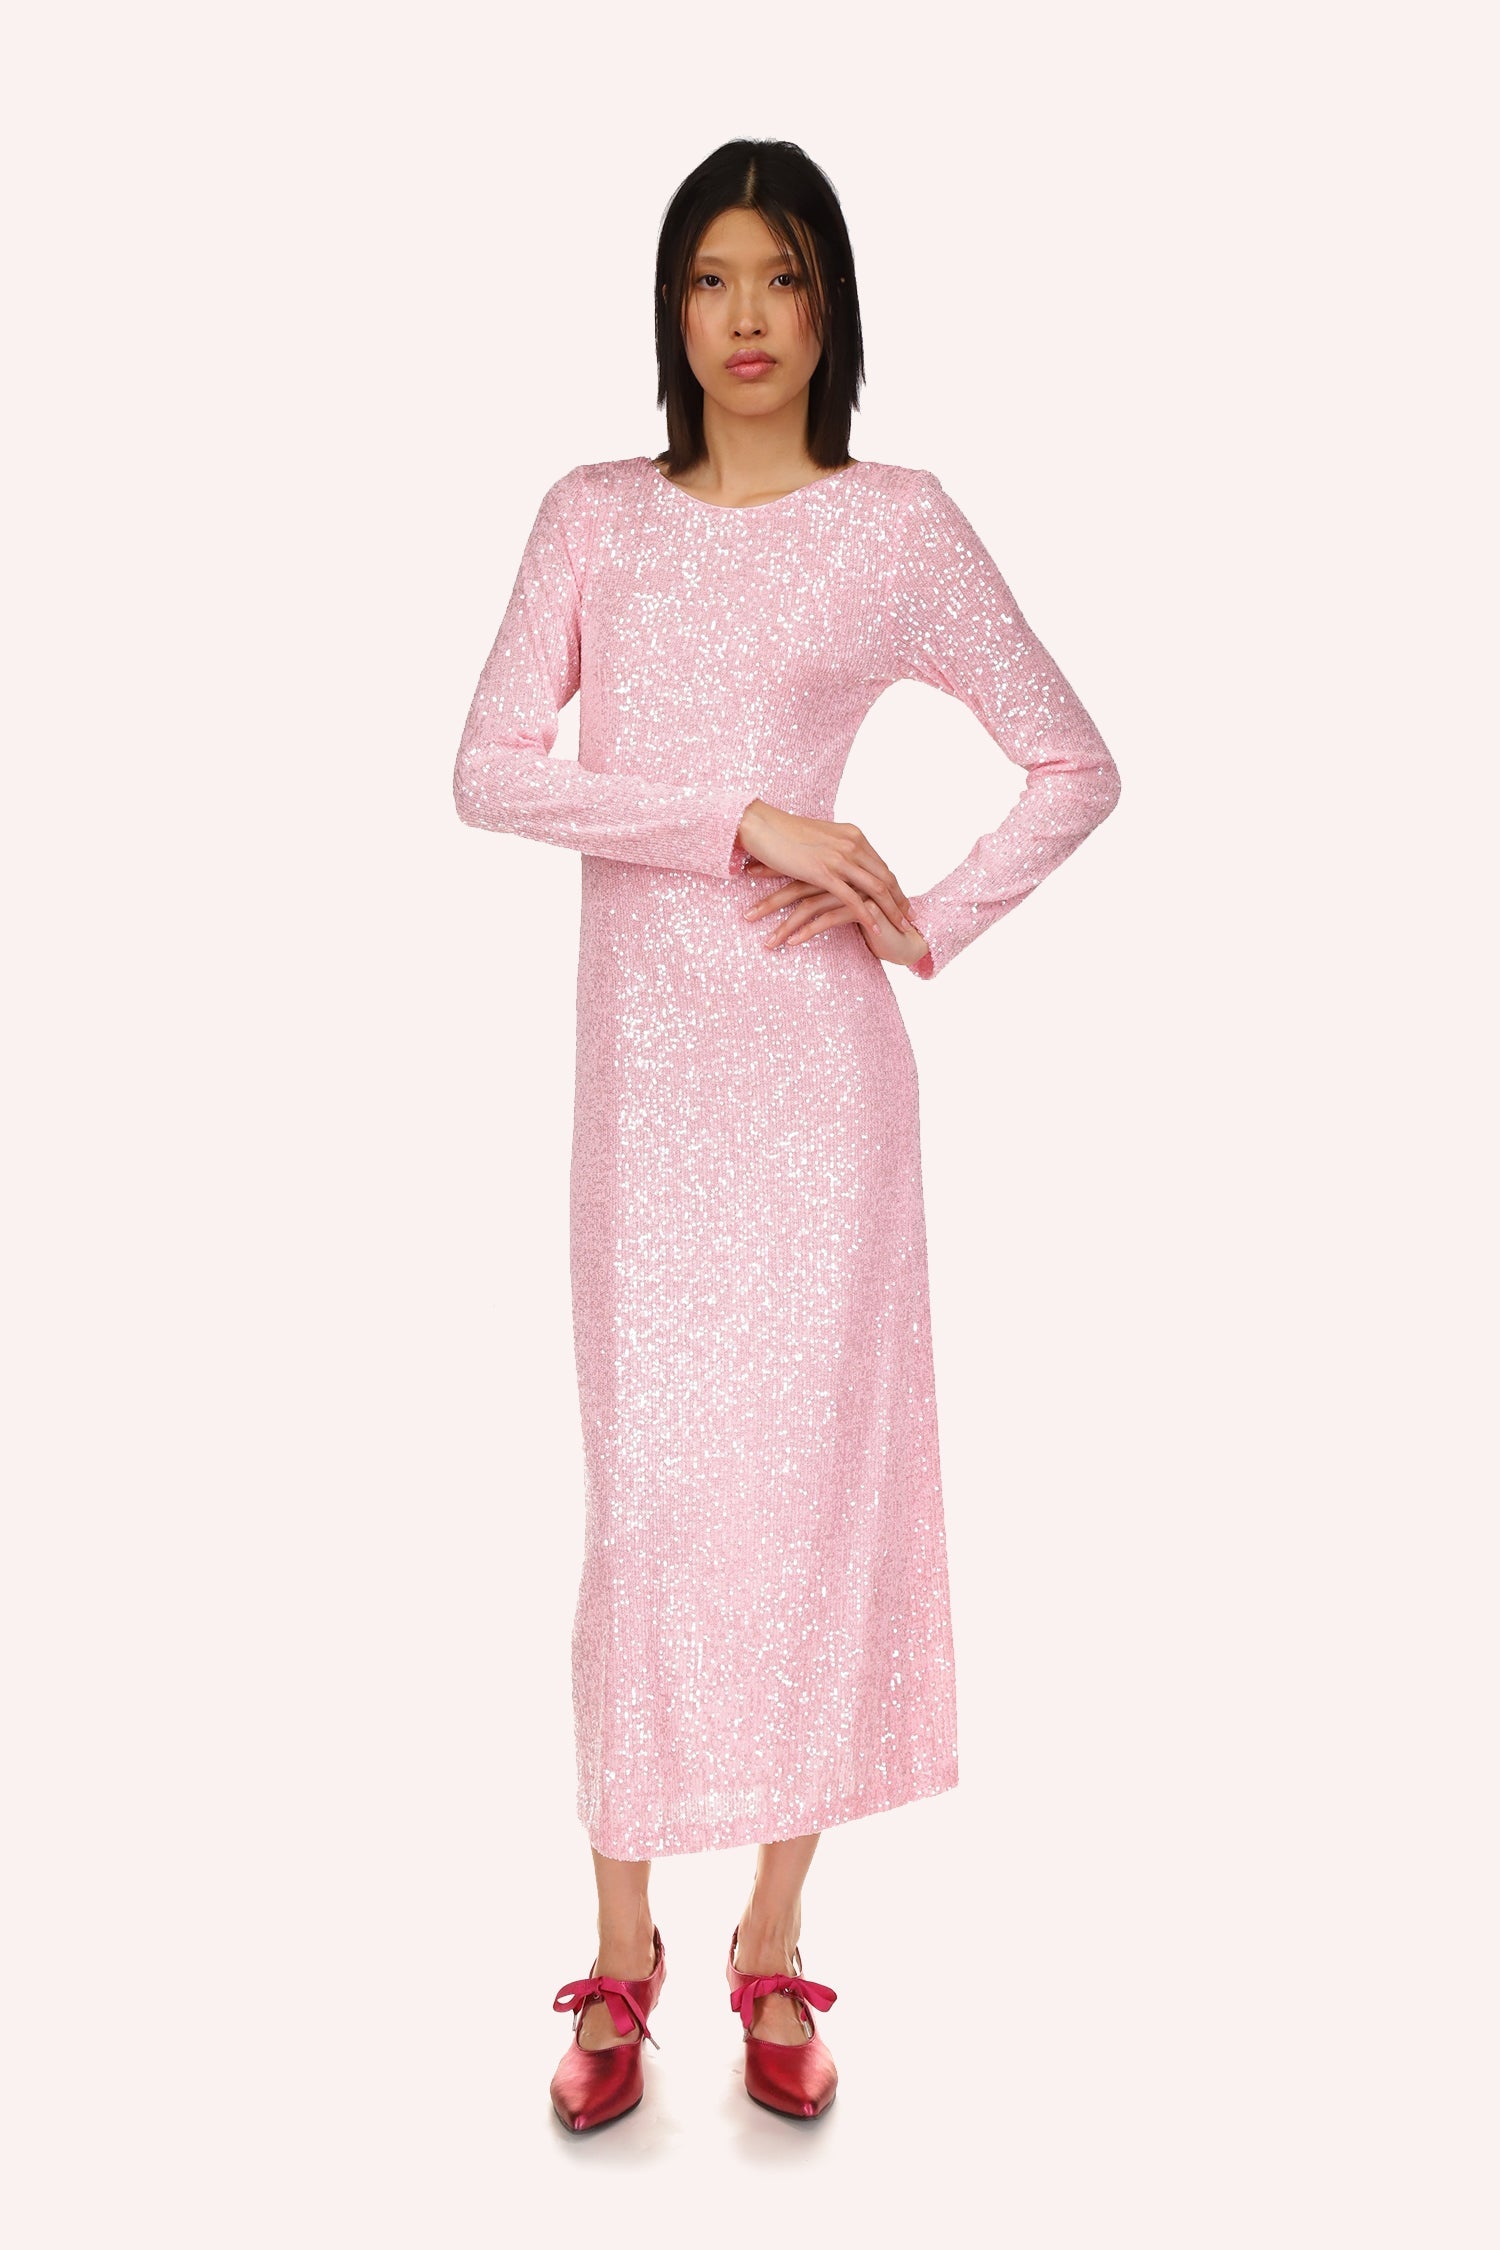 Anna Sui's Sequin Mesh Dress Baby Pink, ankles long, neckline collar, long sleeves